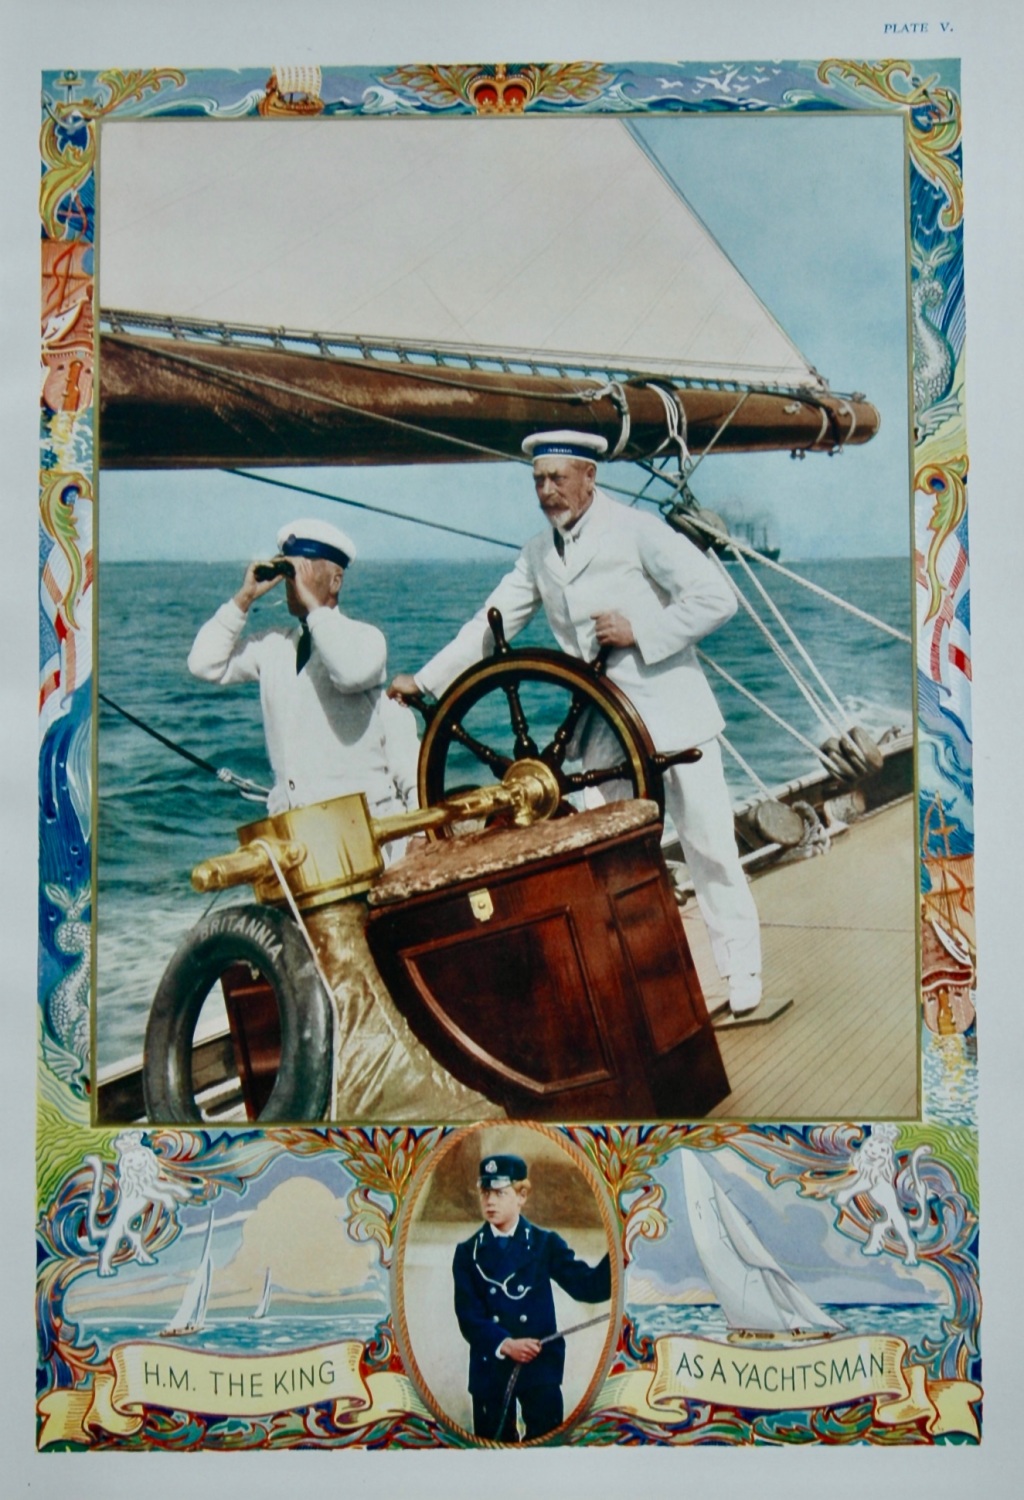 H.M. the King as a Yachtsman. 